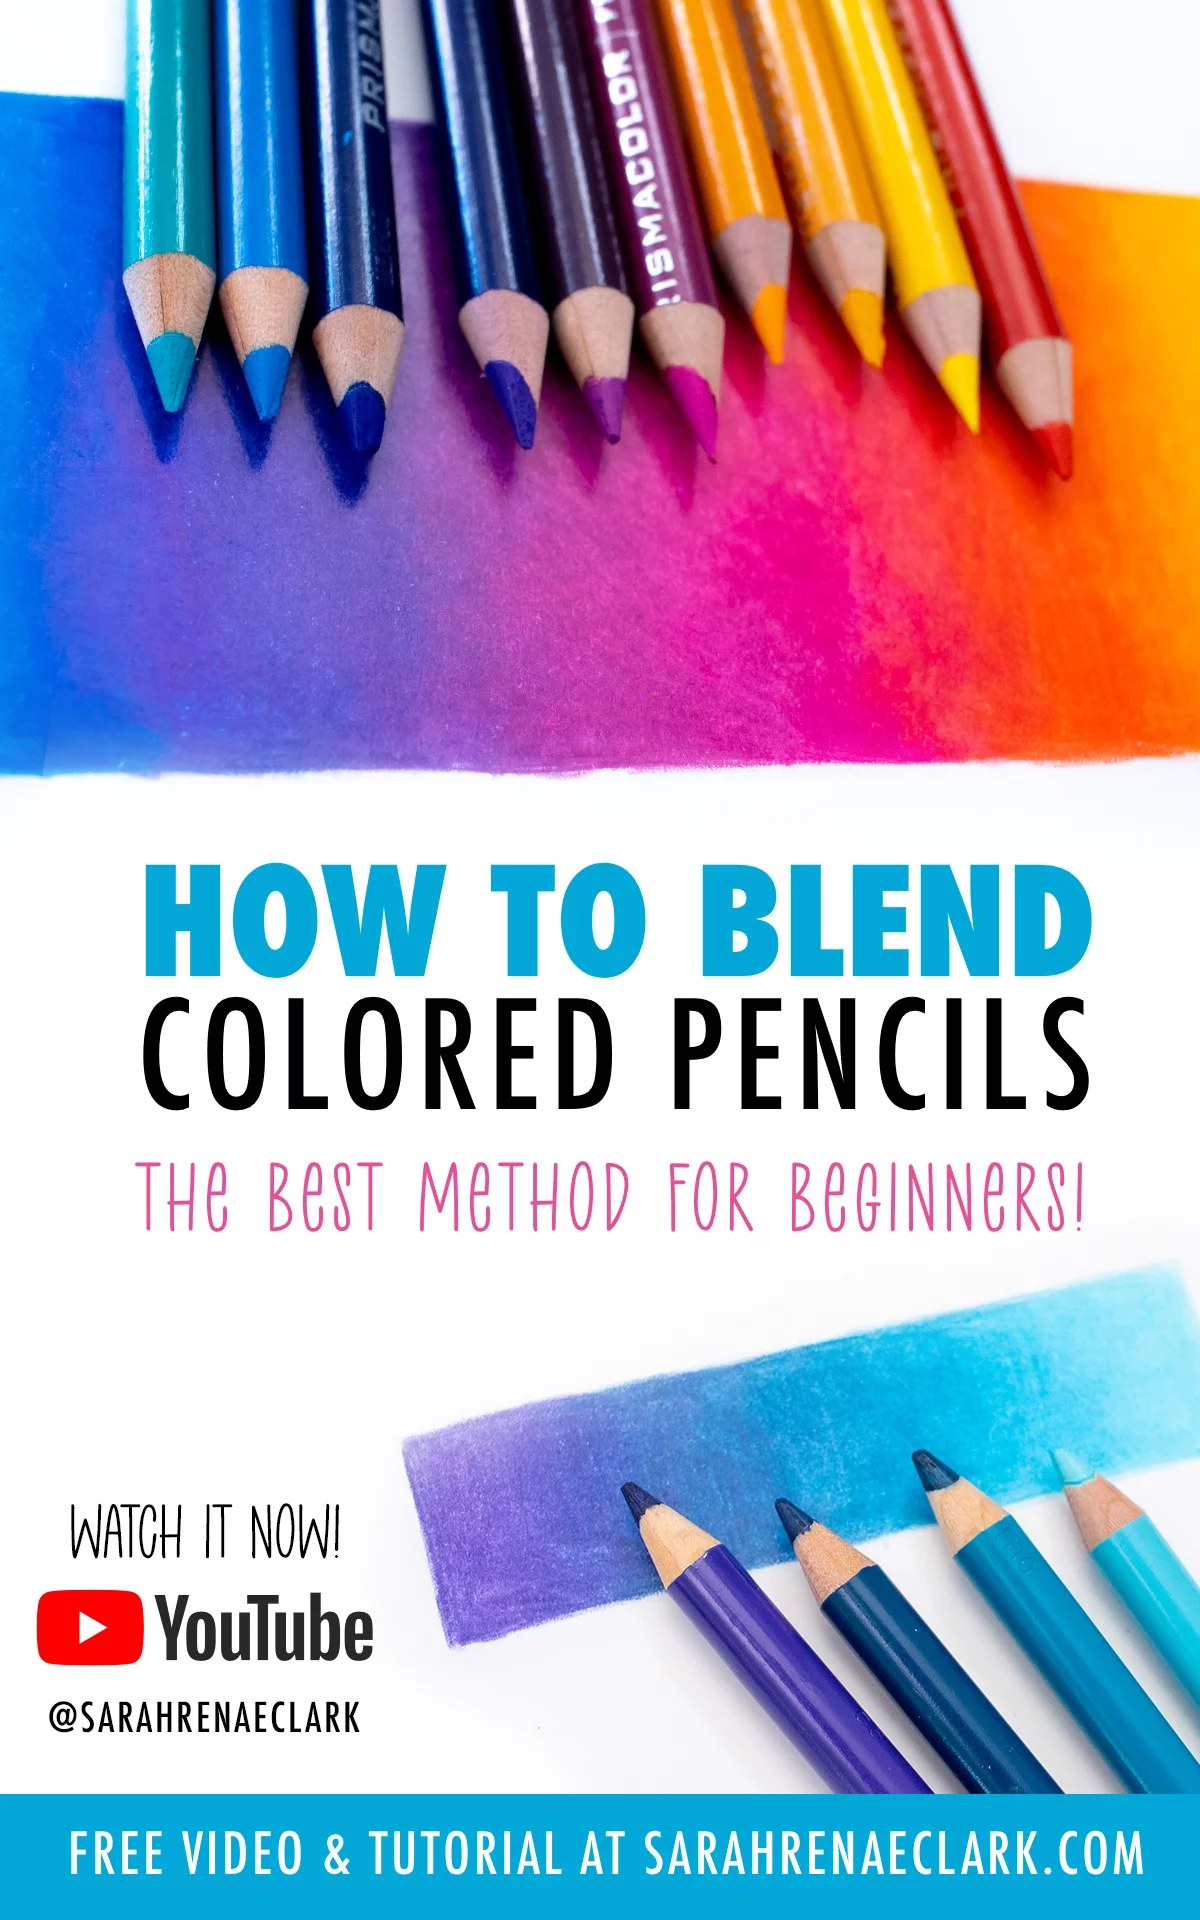 COLORED PENCILS TUTORIAL - FELT AND DEGRADED DRAWING 